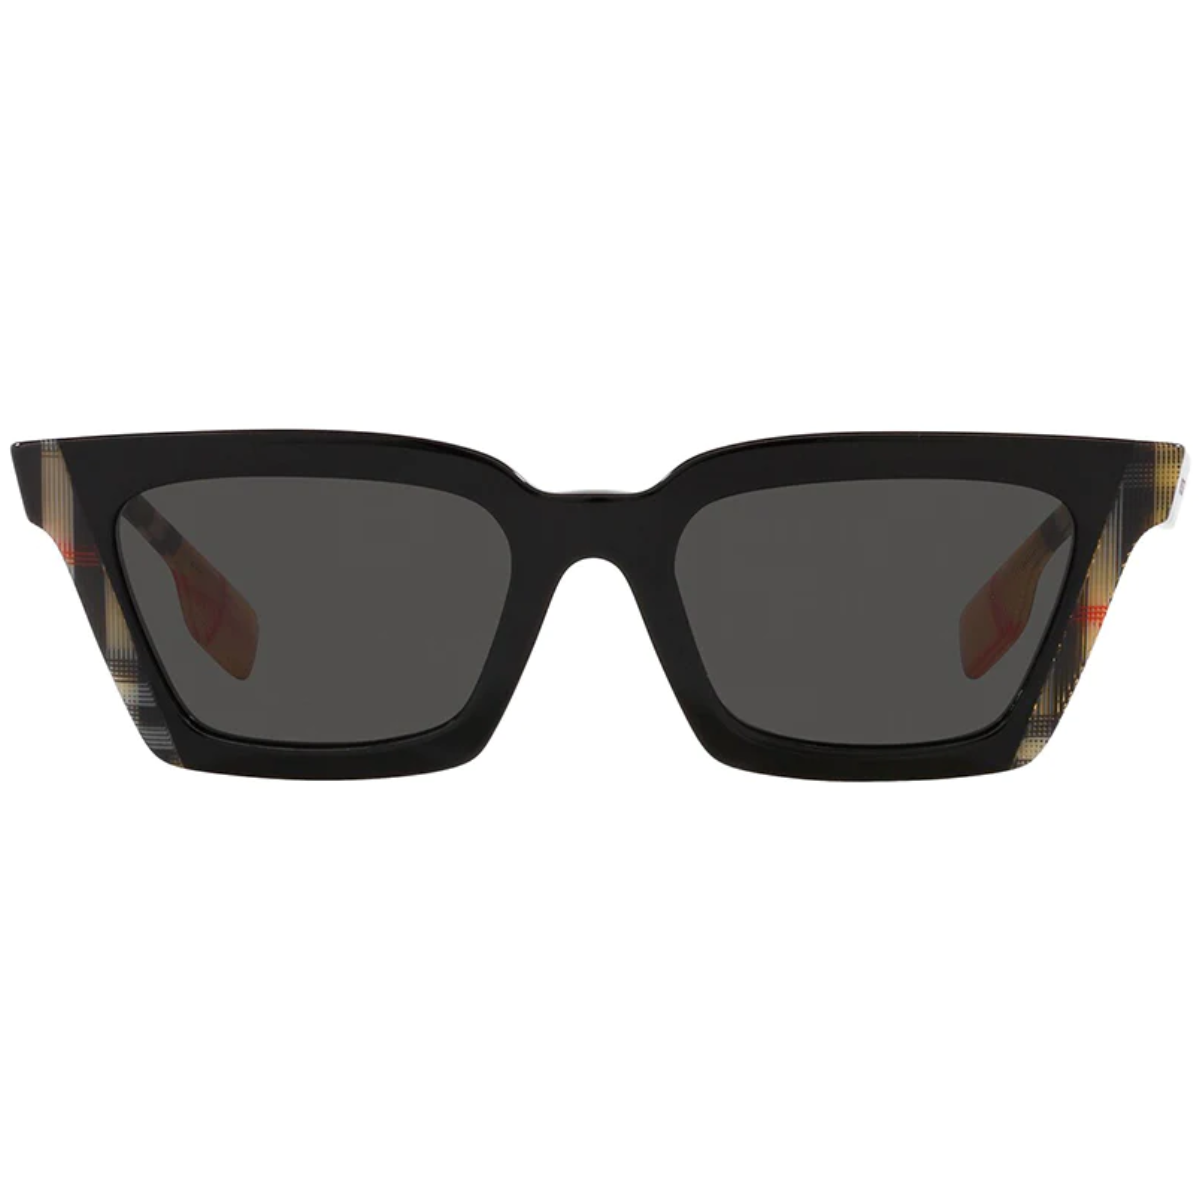 "Shop the best deals at Optorium on Burberry BE4392U sunglasses, showcasing a variety for both men and women with polarized lenses and rectangle frames, plus selections from other leading brands like Ray Ban."